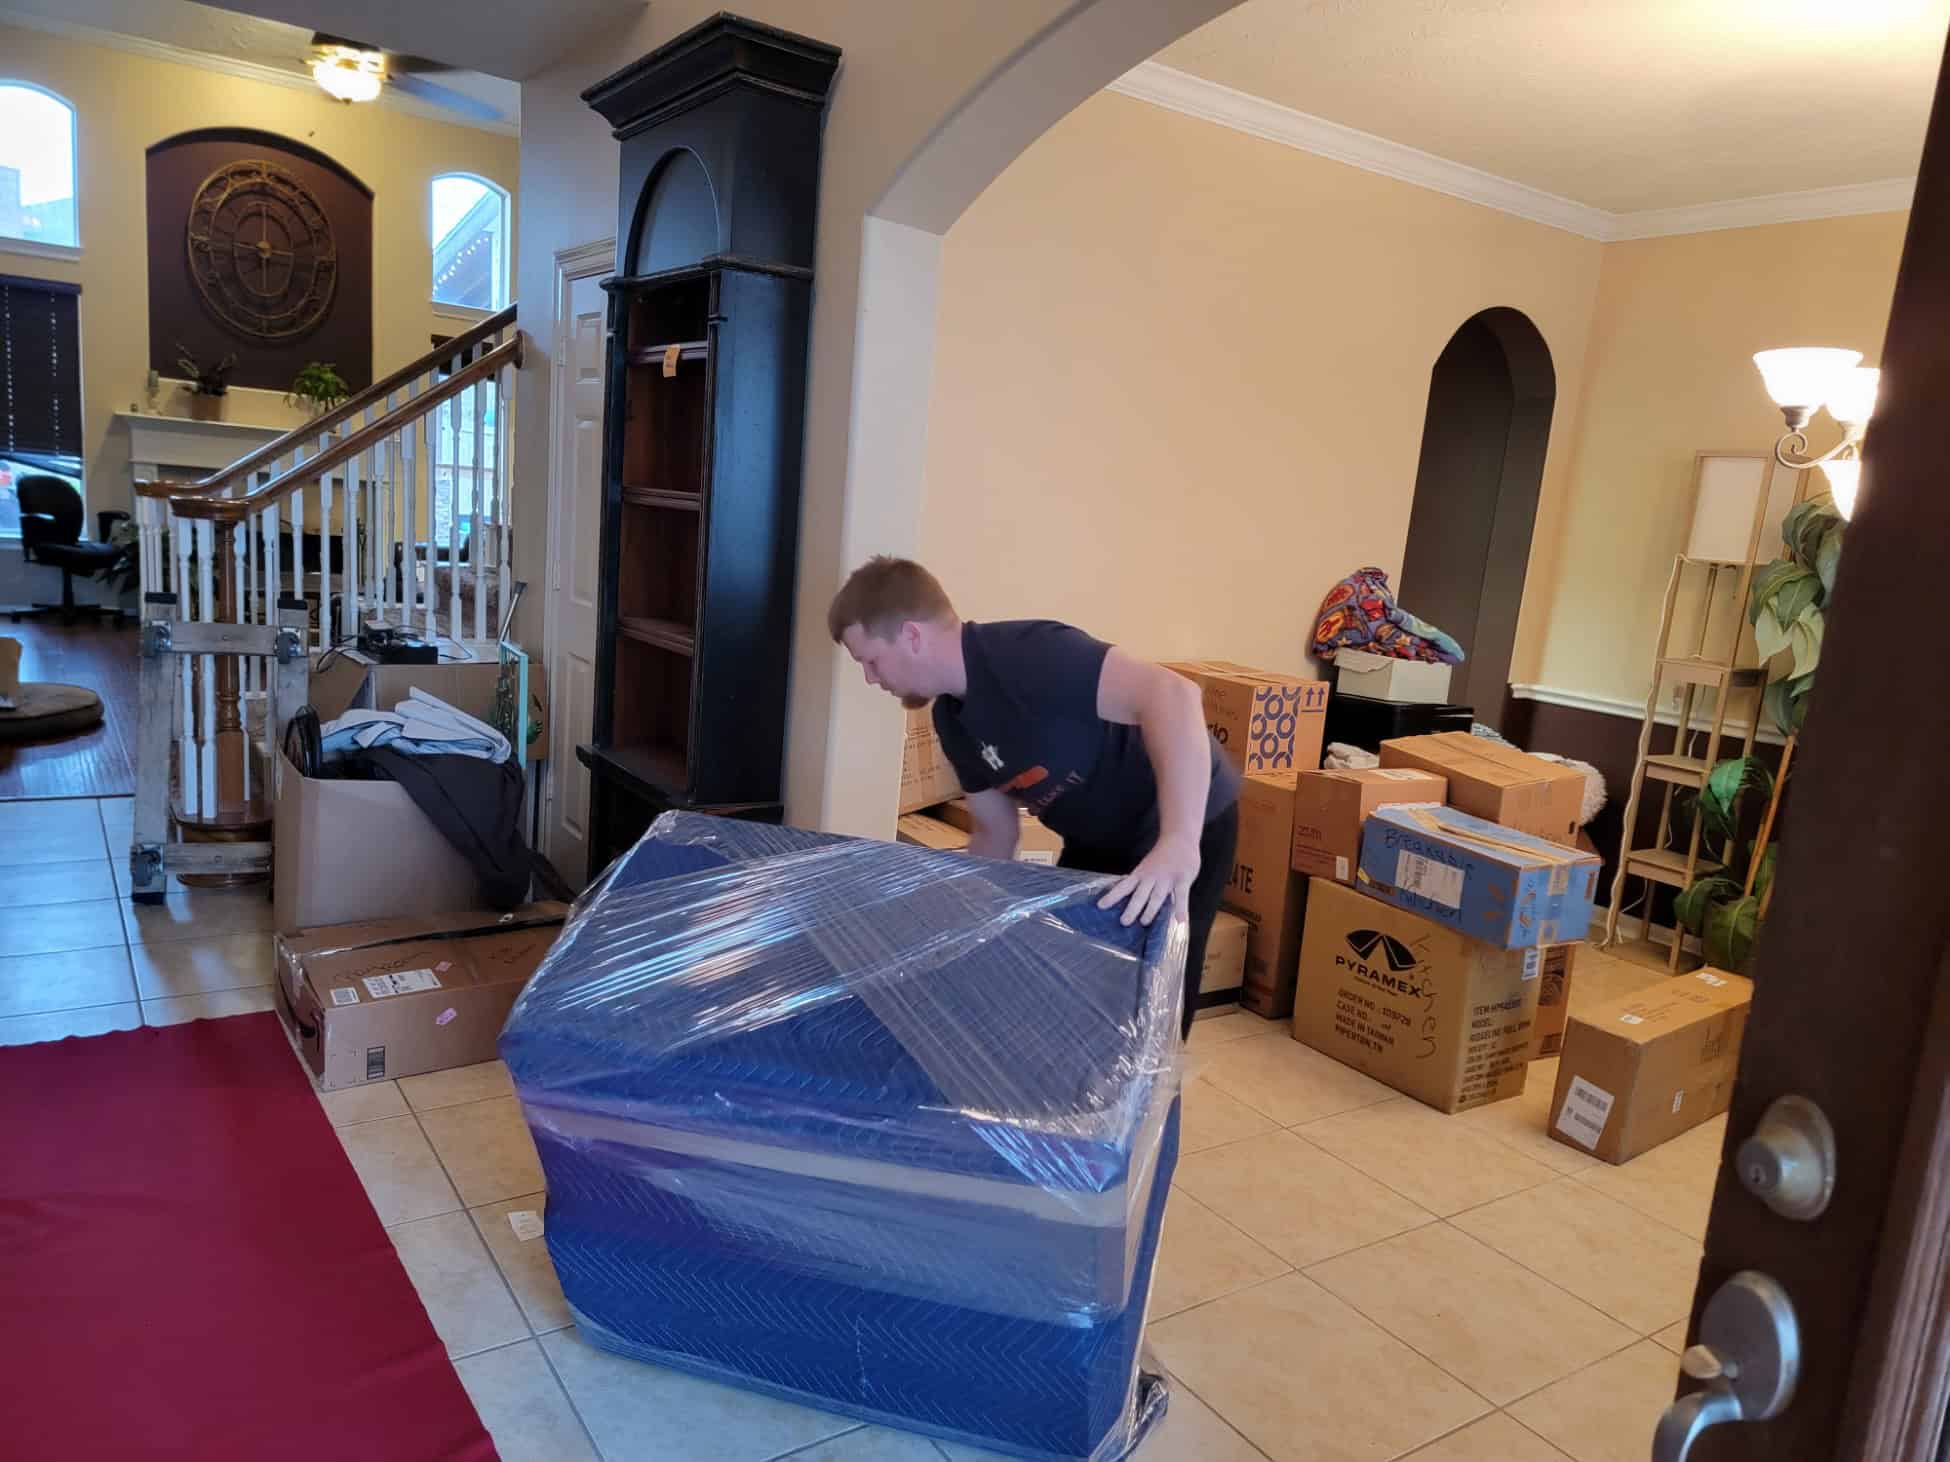 Local Moving Company Services - Frontier Moving, LLC